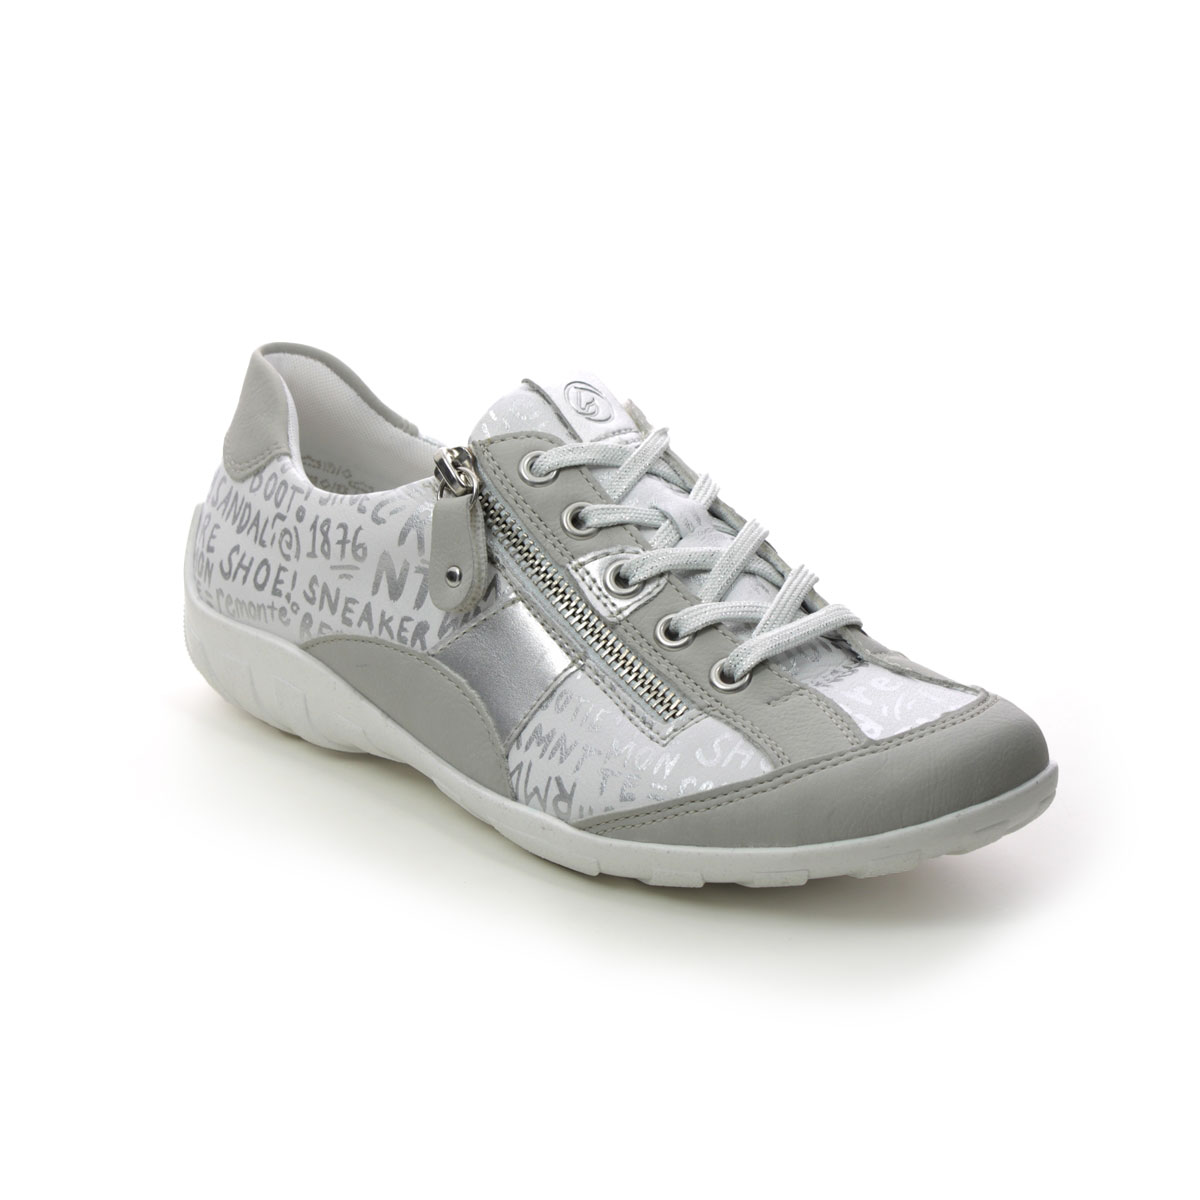 Remonte Livtext 21 Light Grey Leather Womens Lacing Shoes R3403-80 In Size 41 In Plain Light Grey Leather